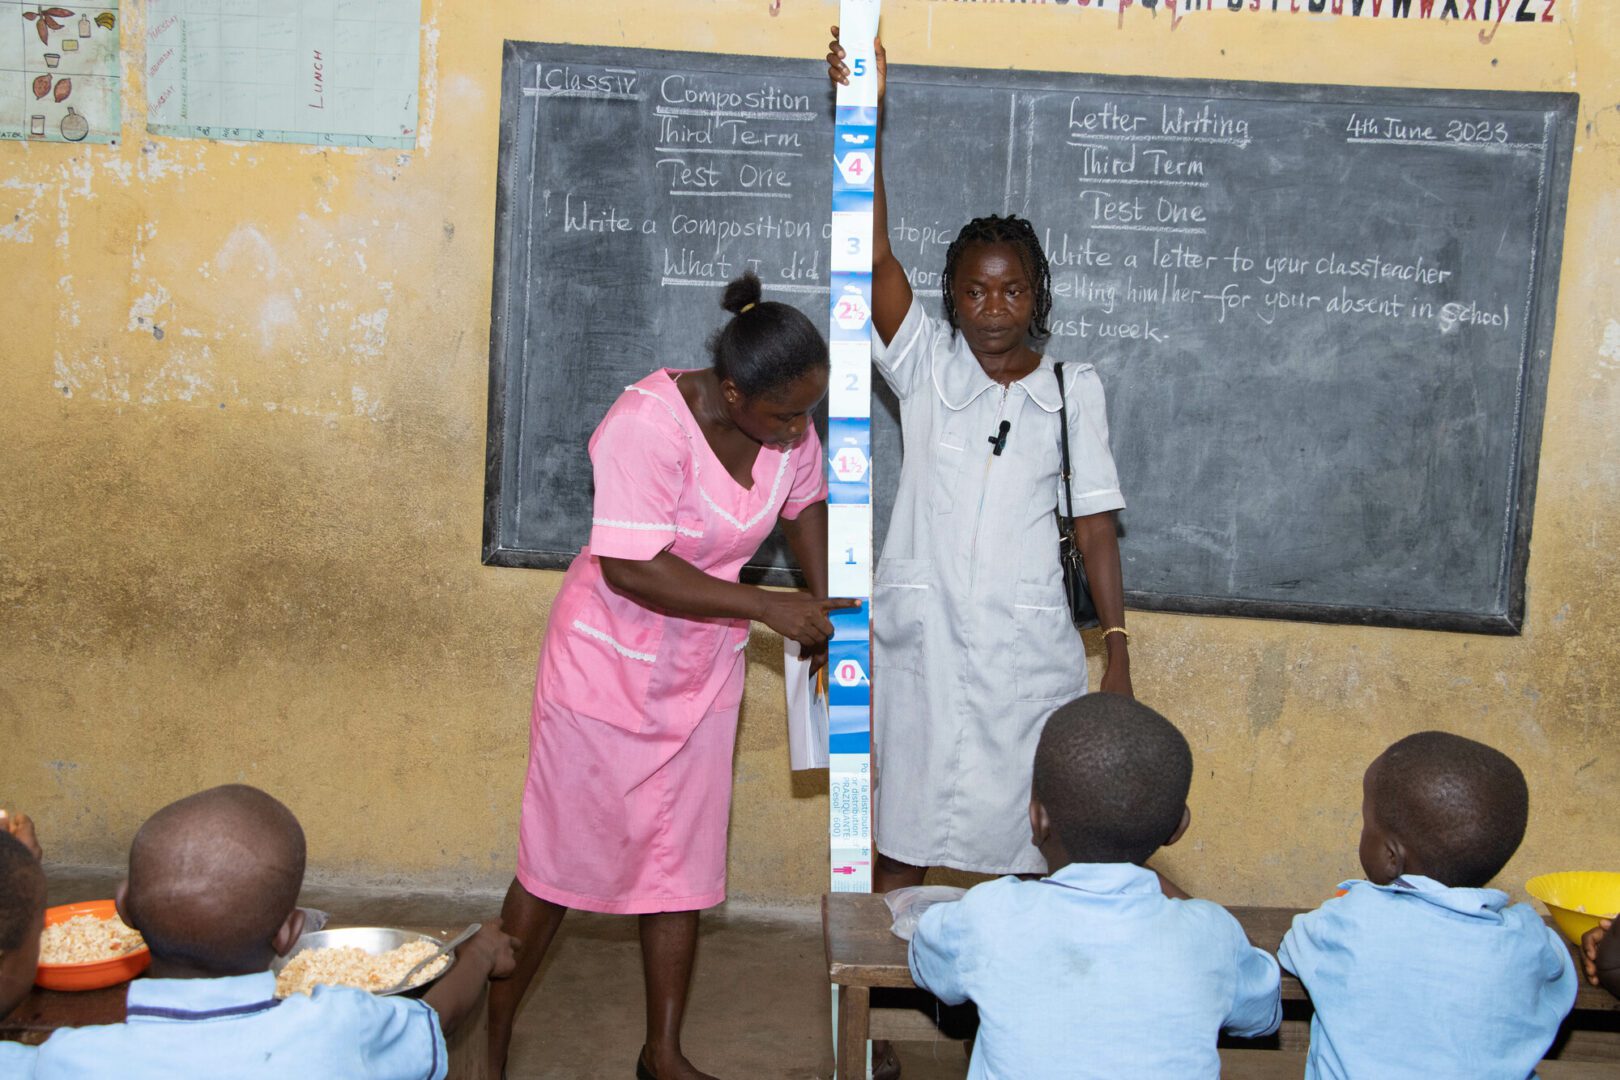 A female healthcare worker and another woman hold up a dose pole, a large measuring stick divided into sections, in front of a classroom of students in Sierra Leone. The healthcare worker points out one of the sections of the dose pole.